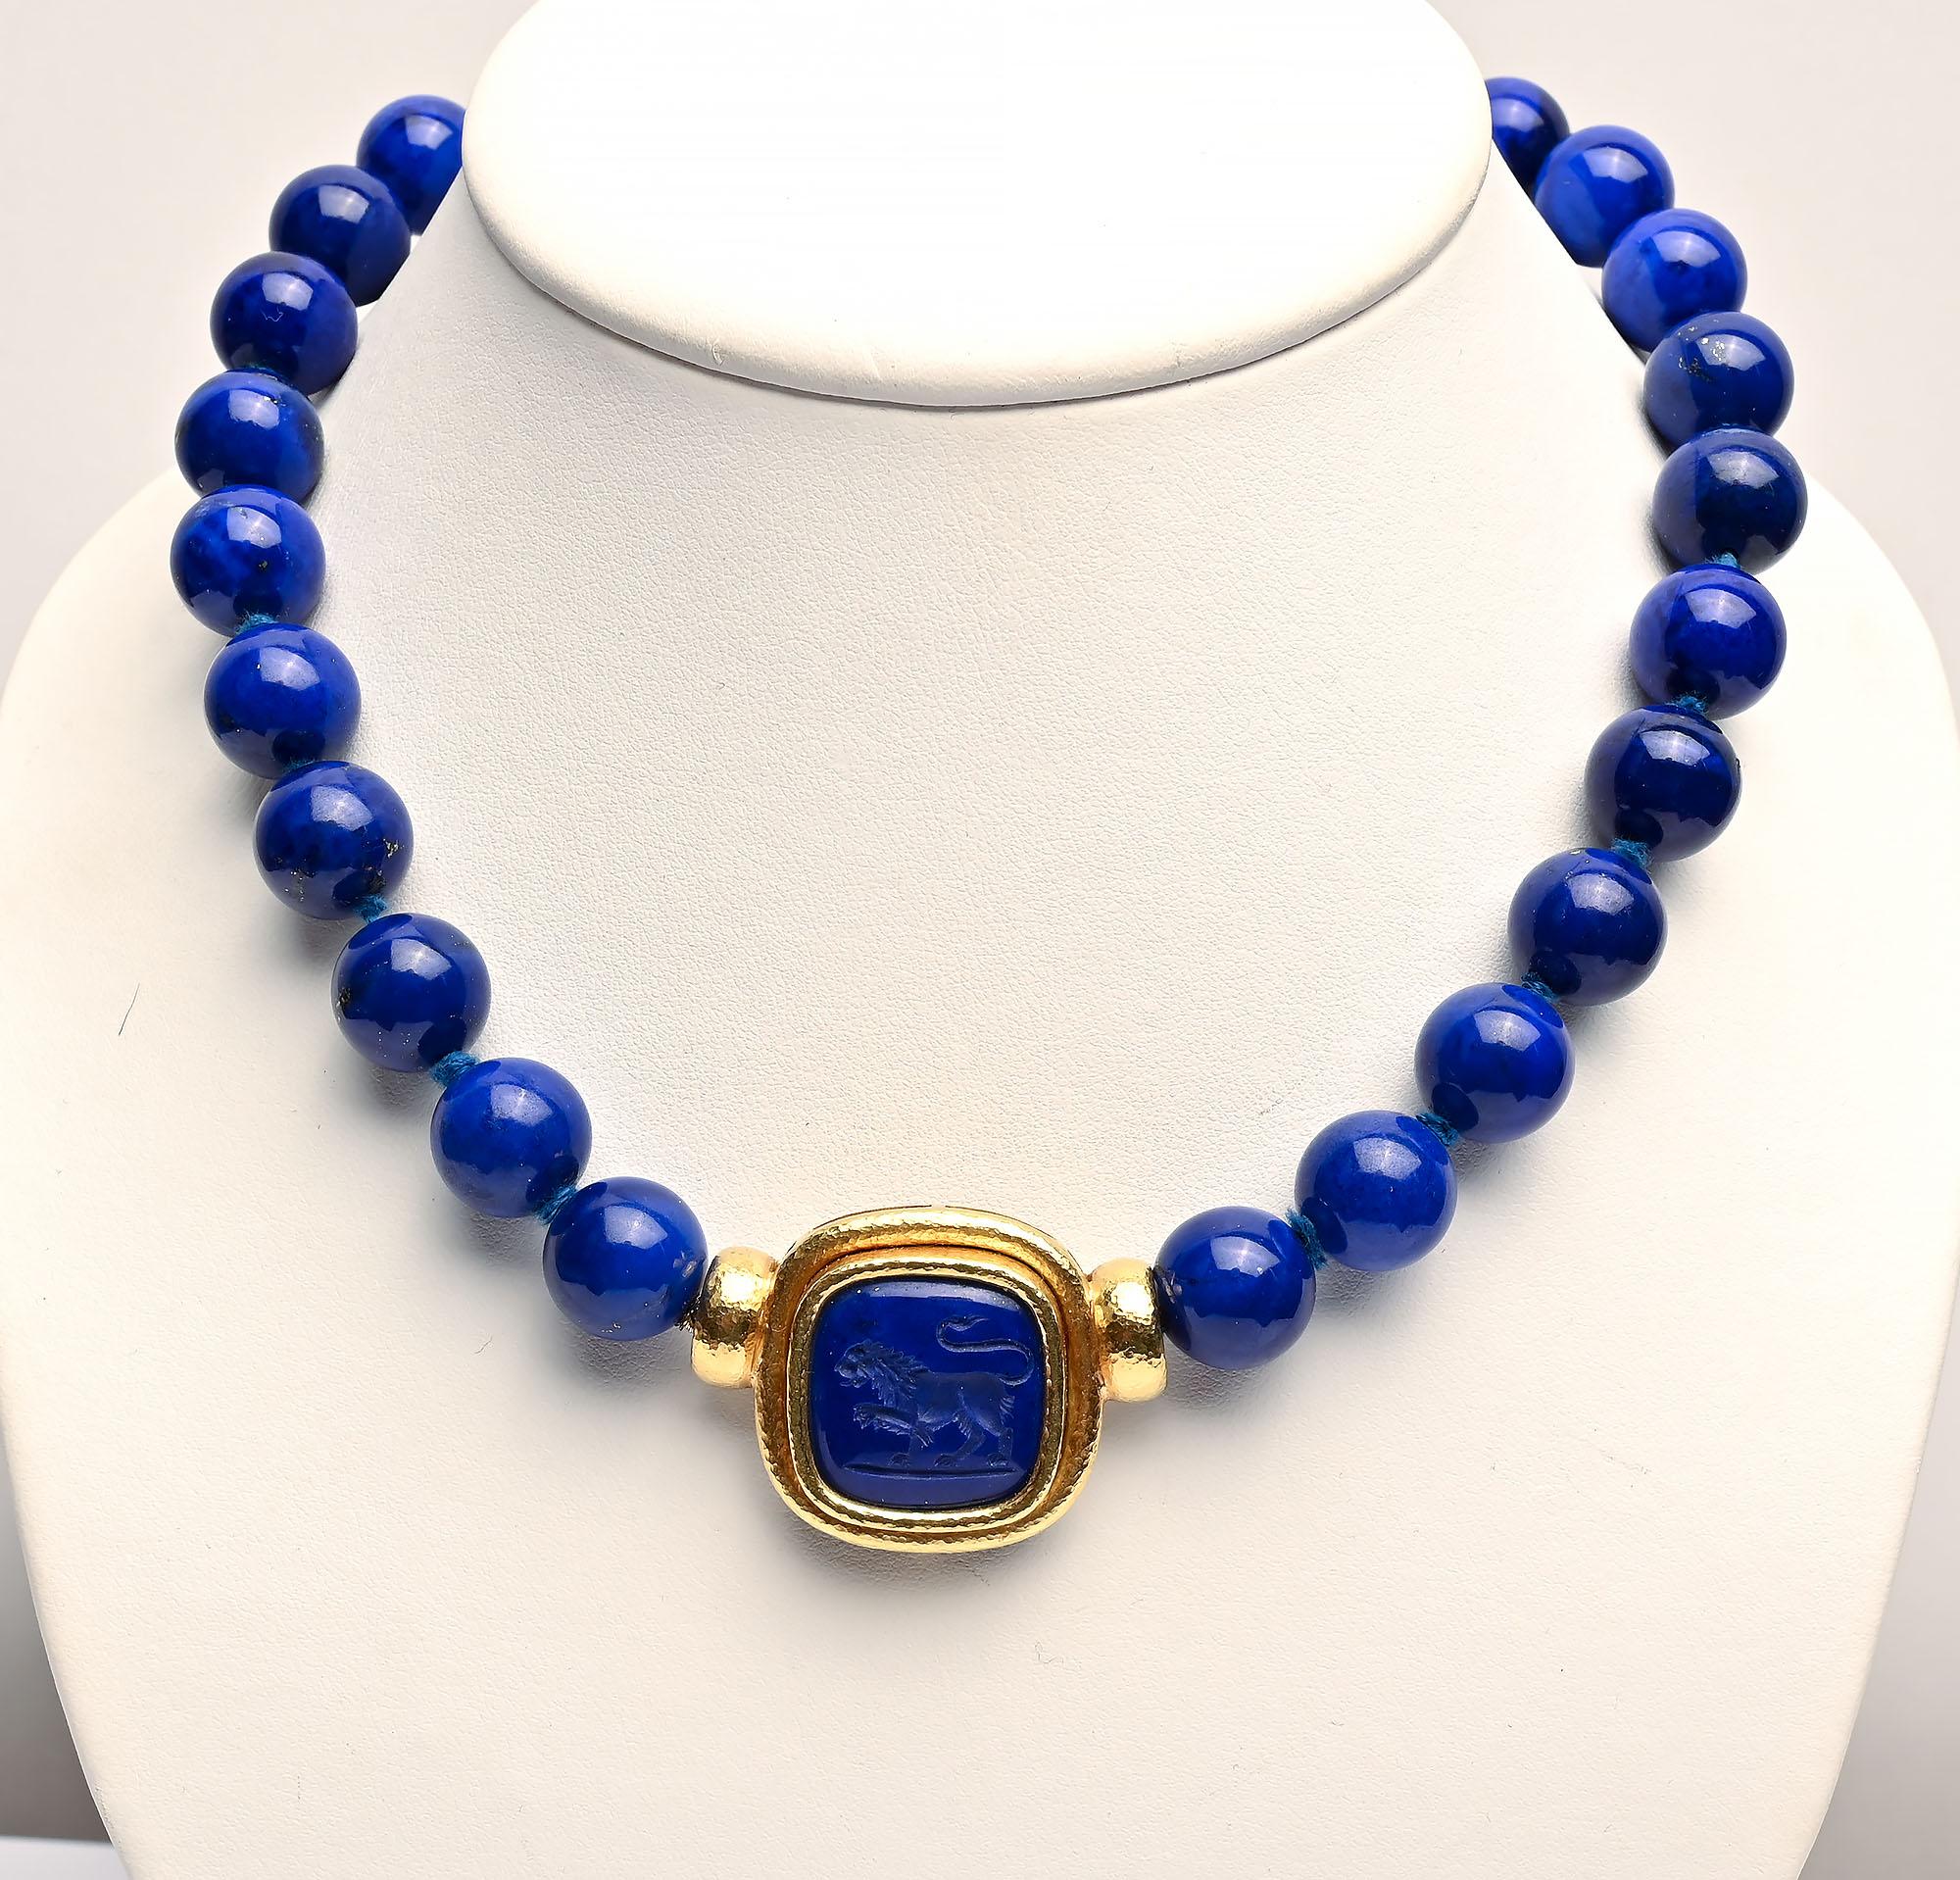 Stunning Elizabeth Locke  necklace with brilliantly colored lapis lazuli beads that measure about 12.5 mm. . The clasp is a medallion with a lion. It can be interchanged with other Locke pendants. The necklace measures 18 inches including the